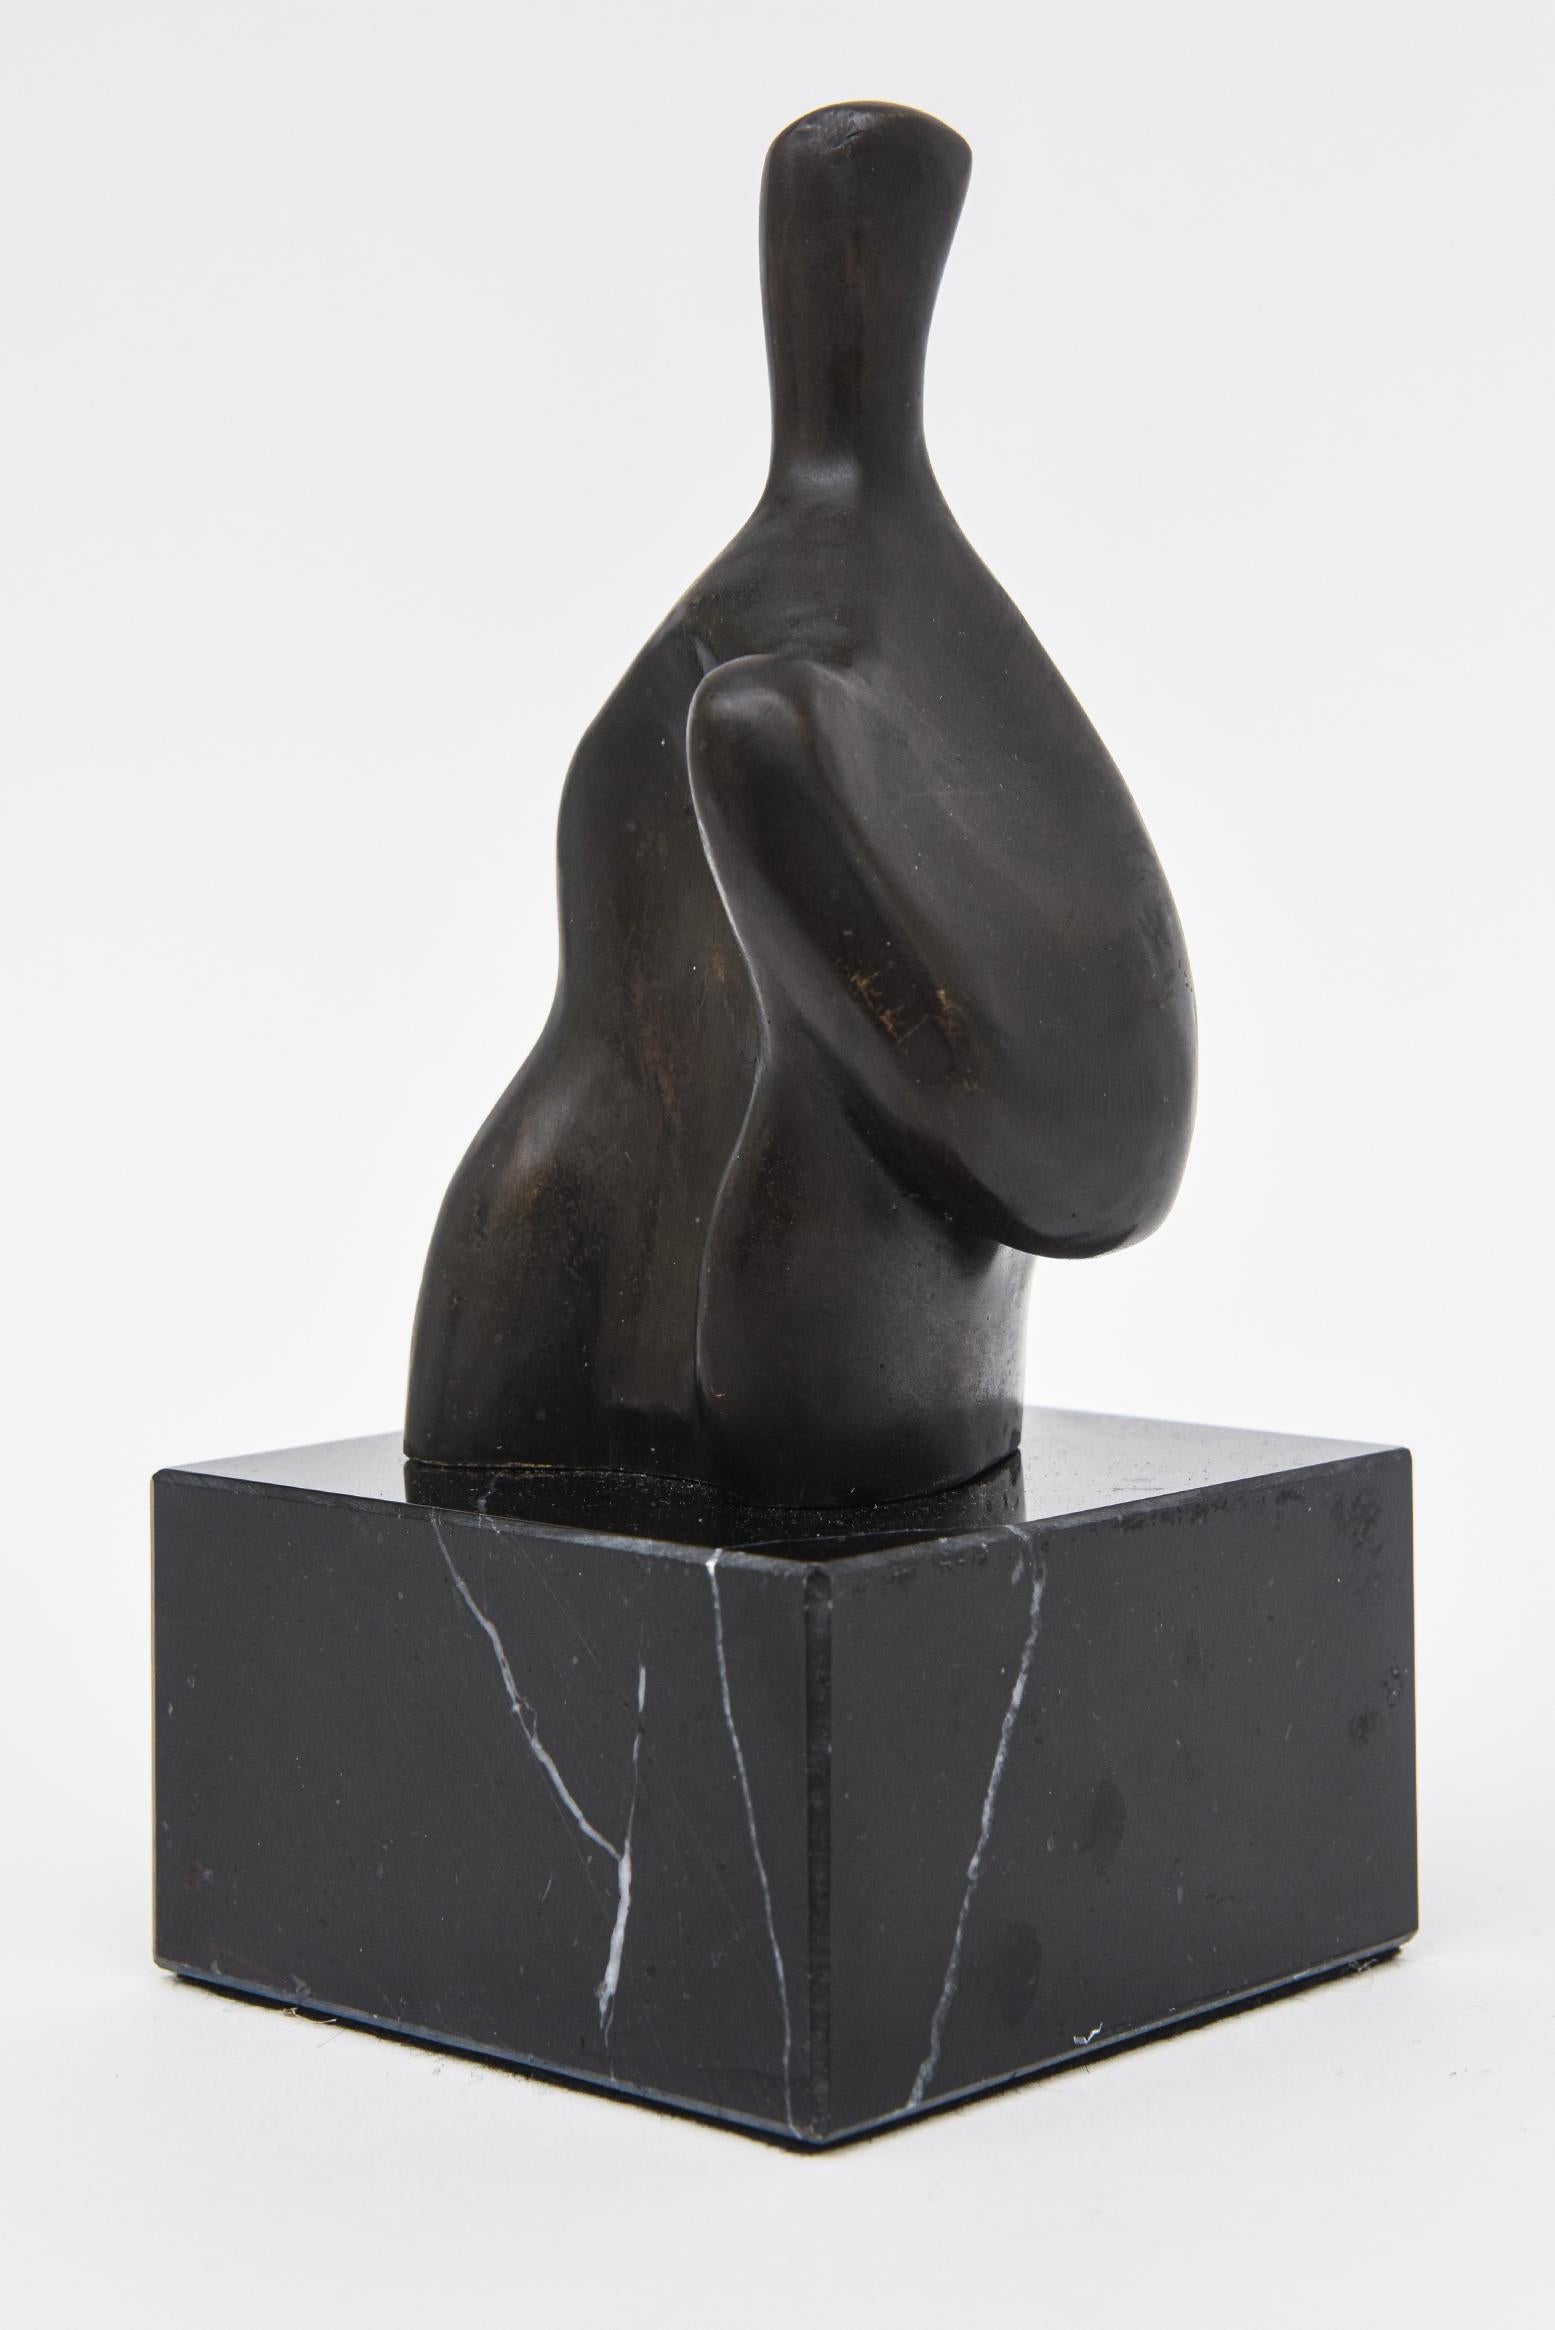 This unique vintage bronze abstract figurative sculpture is on a black veined marble base it is not numbered. The style is very much reminiscent and influence of a Henry Moore. Great small tabletop sculpture as a desk accessory or cocktail table.